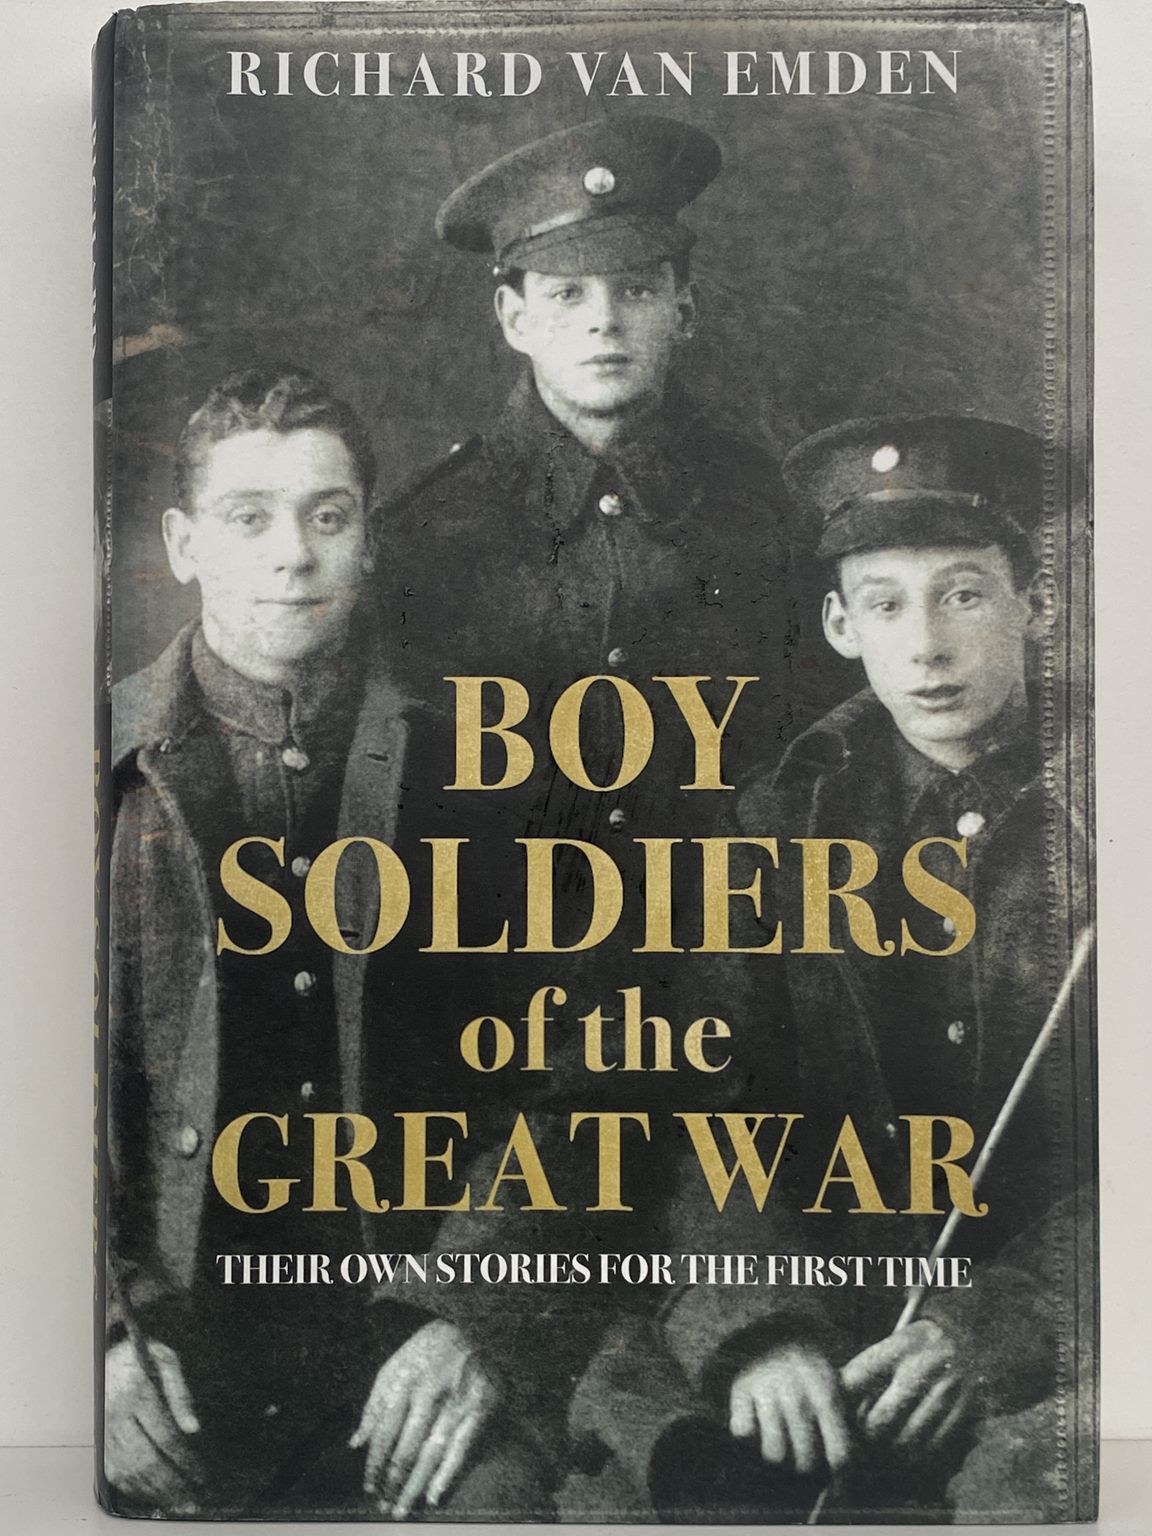 BOY SOLDIERS OF THE GREAT WAR: Their Own Stories for the First Time